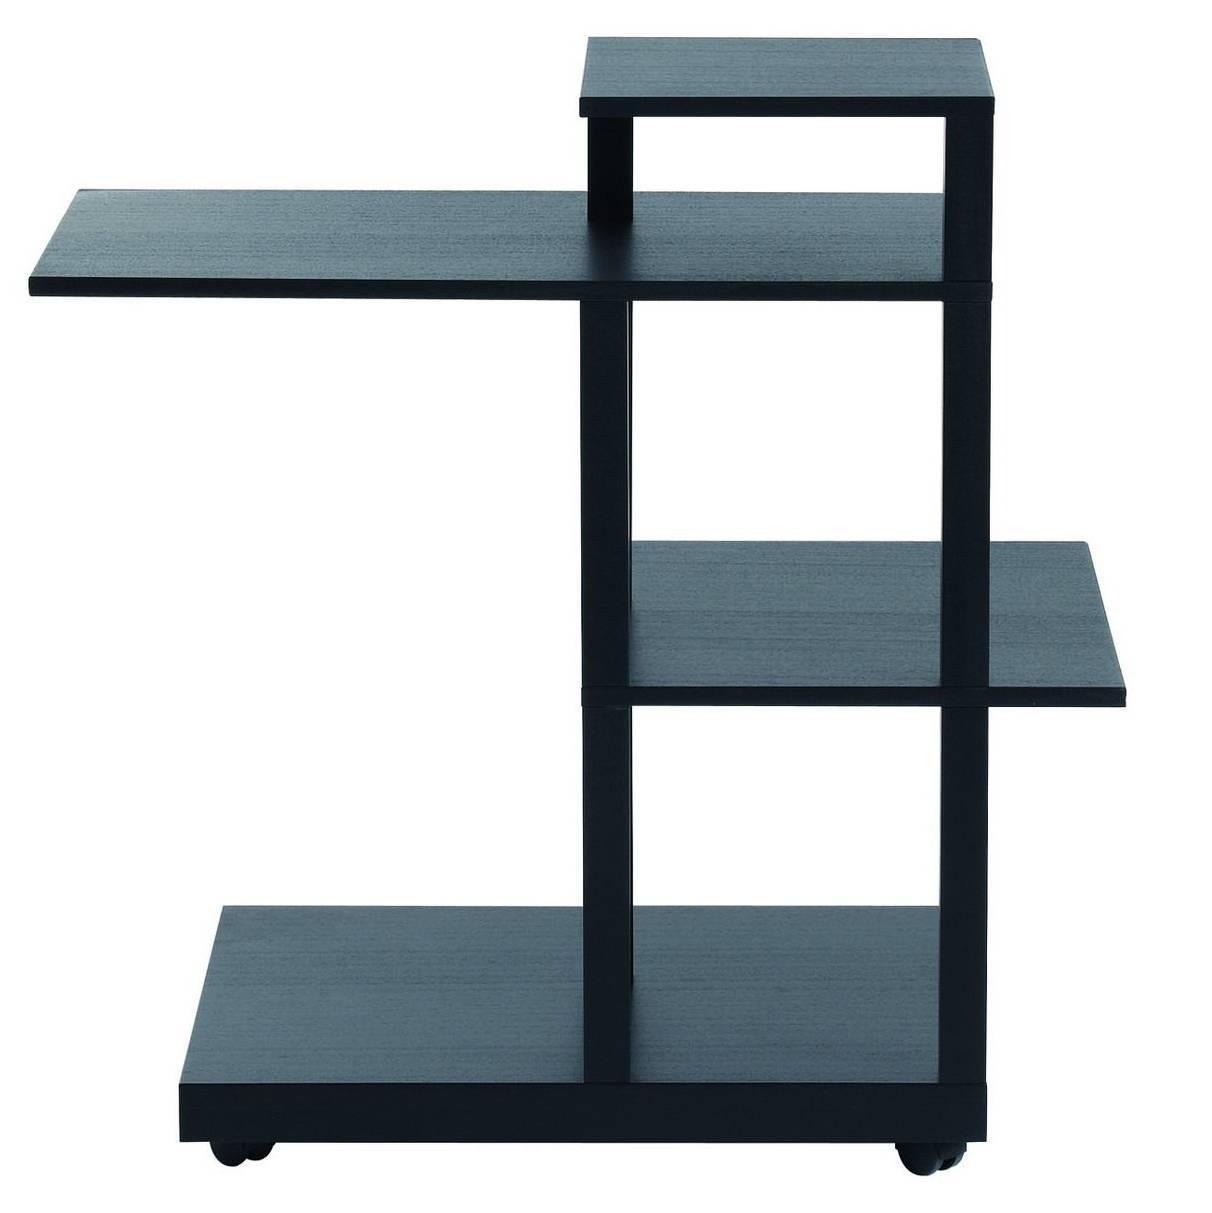 "Mak" Solid Wood and Ebonized Shelves Castored Table by G. Chigiotti for Driade